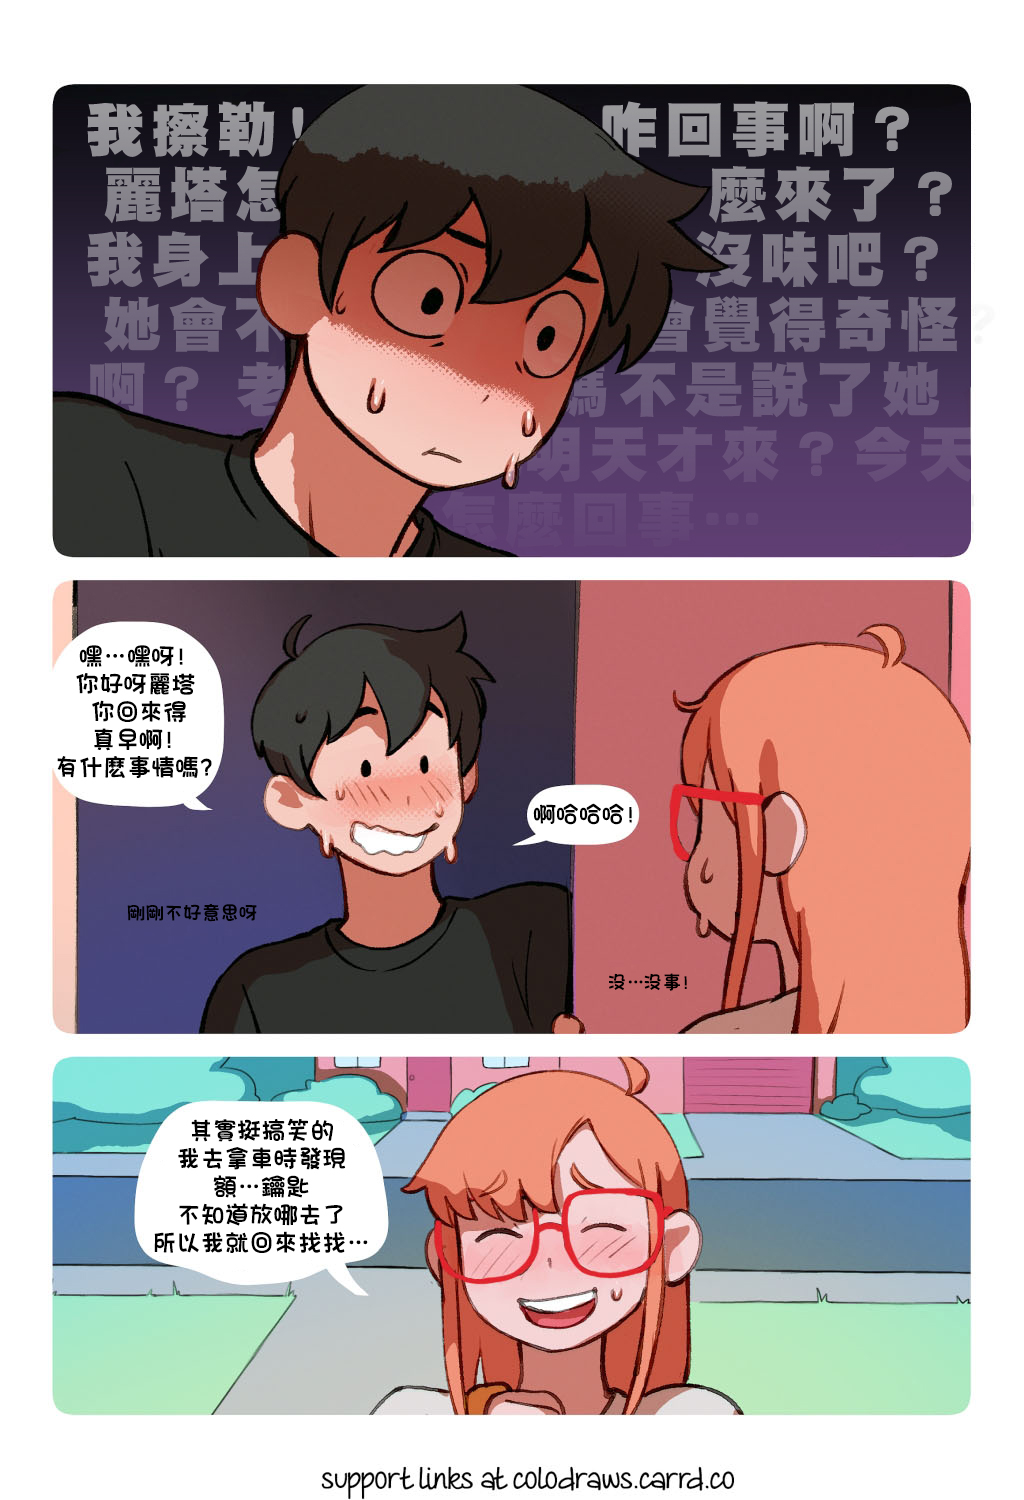 [ColoDraws] SweetHex: The Webcomic  | 甜蜜魔法  [Chinese] [沒有漢化] [Ongoing] 